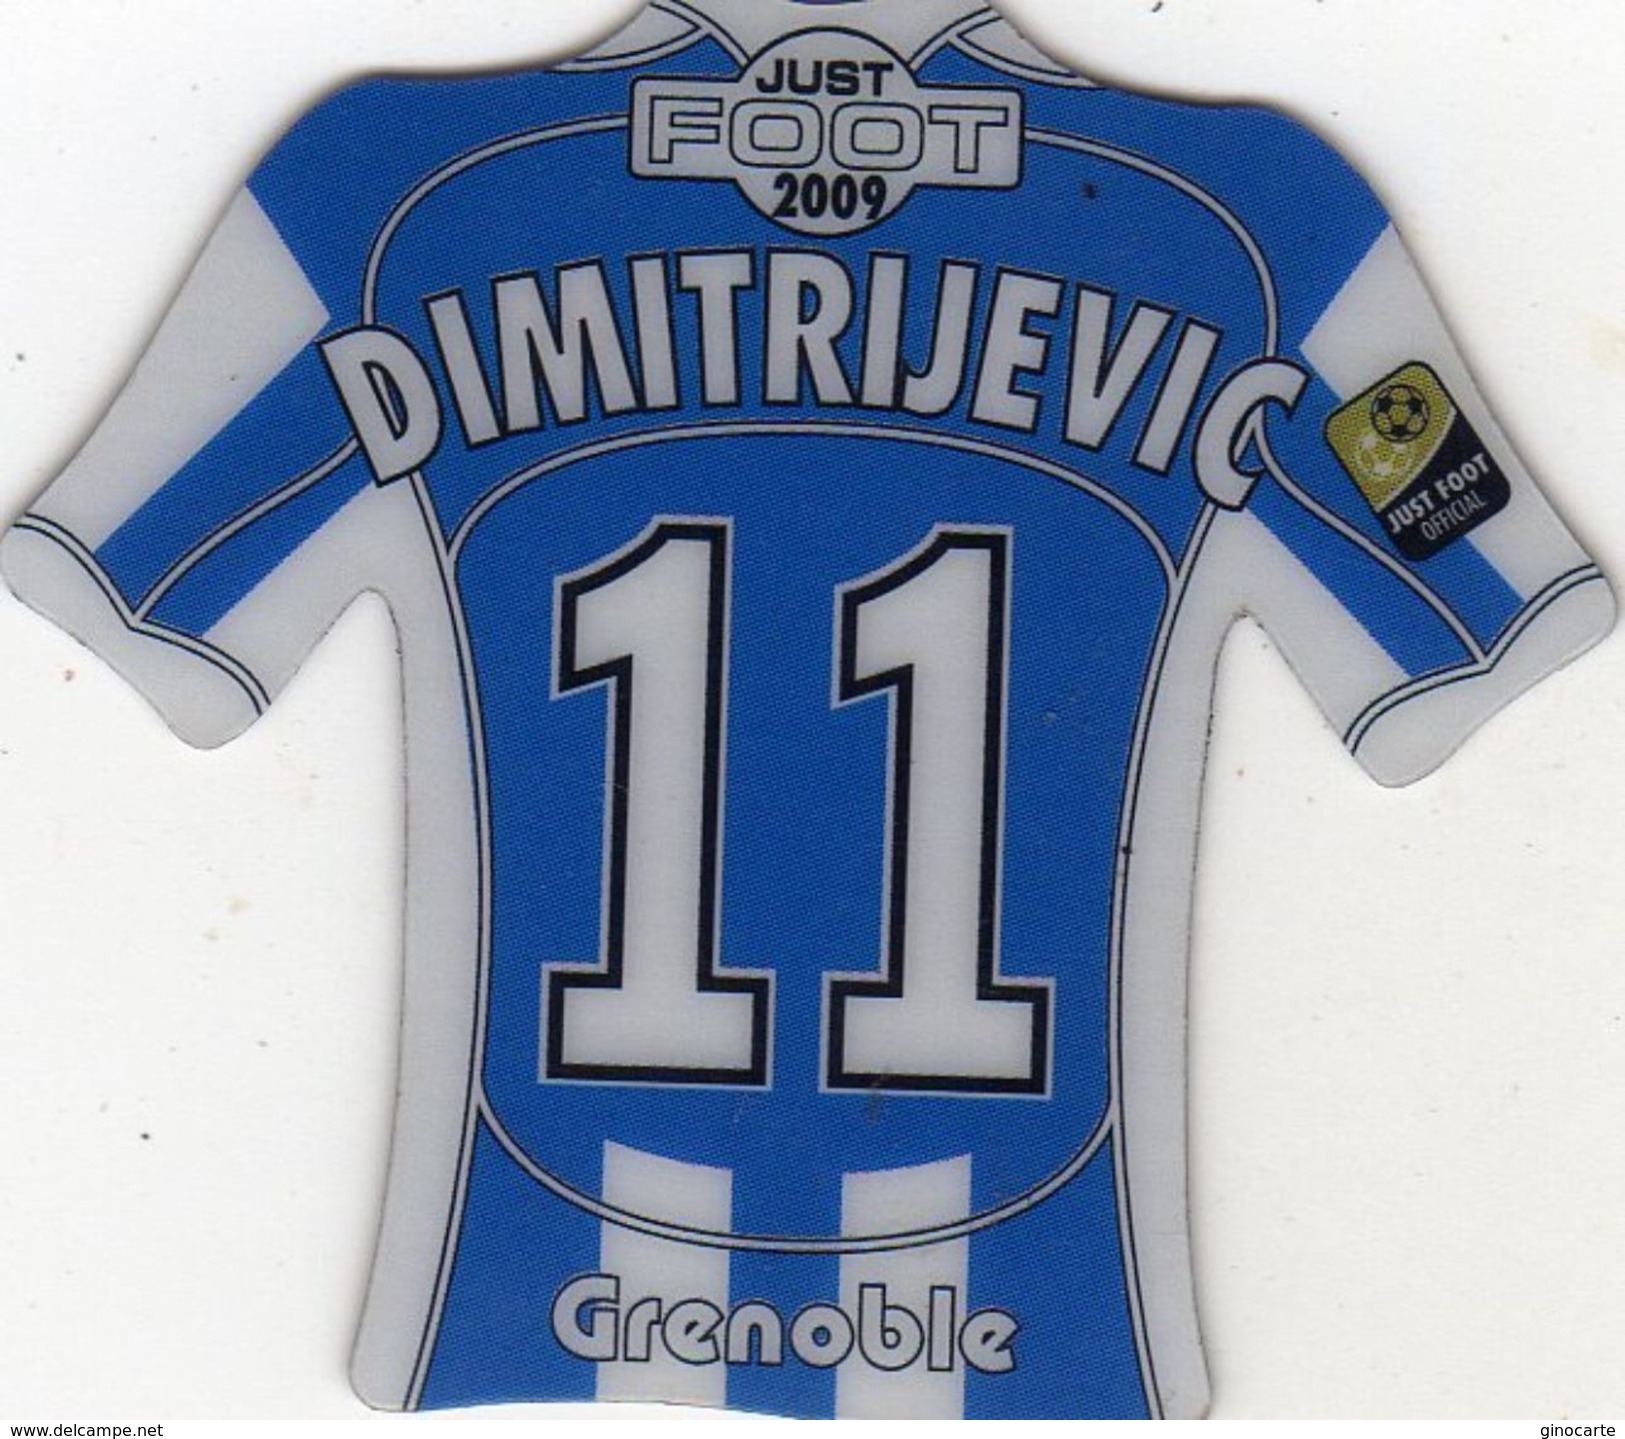 Magnet Magnets Maillot De Football Pitch Grenoble Dimitrijevic 2009 - Sports